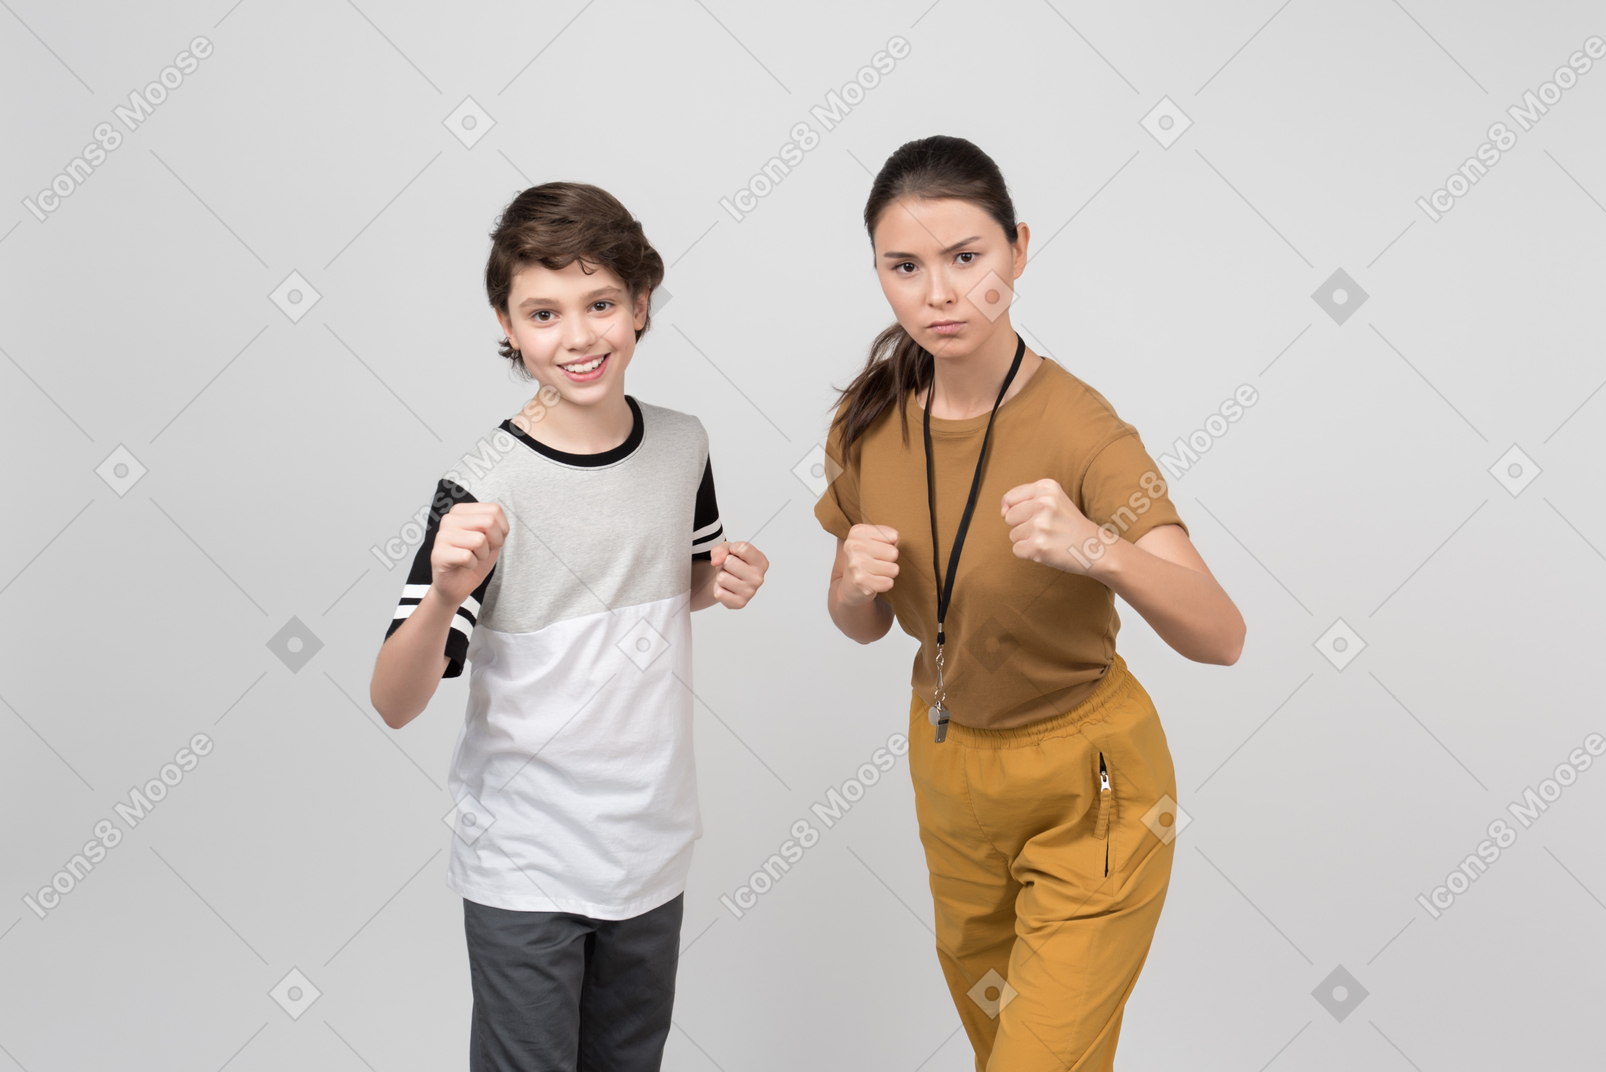 Pe teacher and pupil clenching their fists and feeling powerful